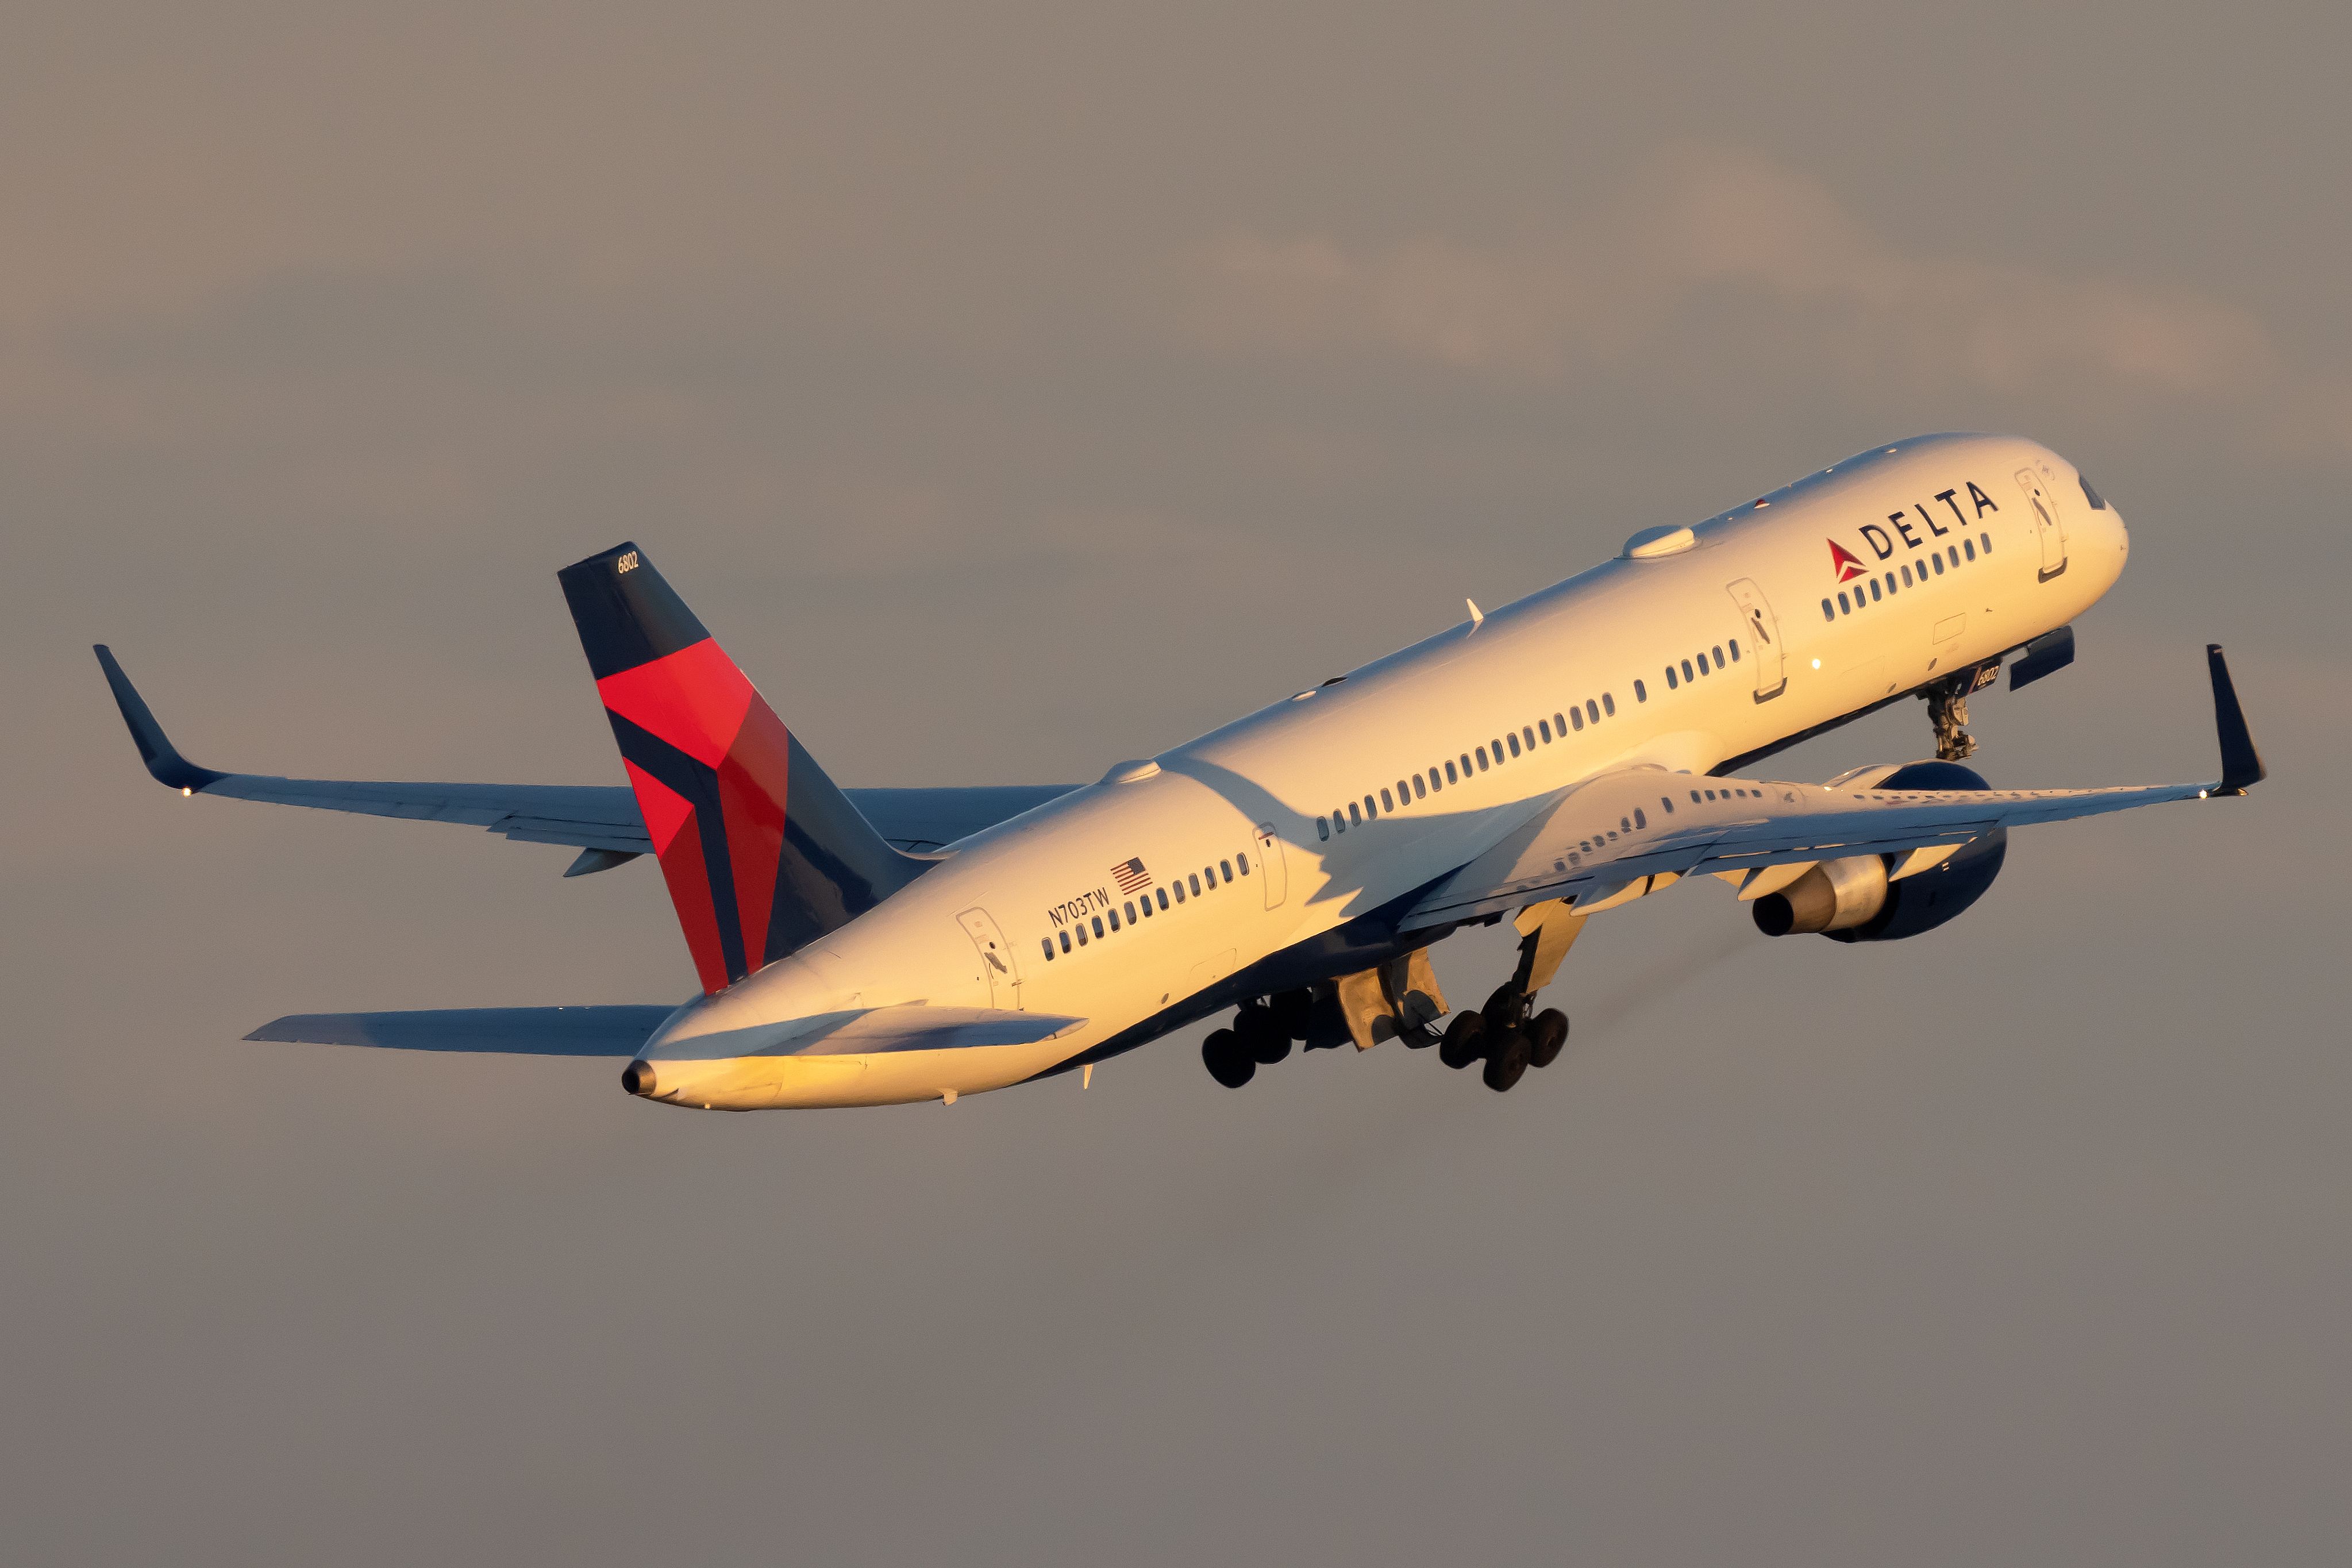 A Delta Air Lines Boeing 757-200 departing